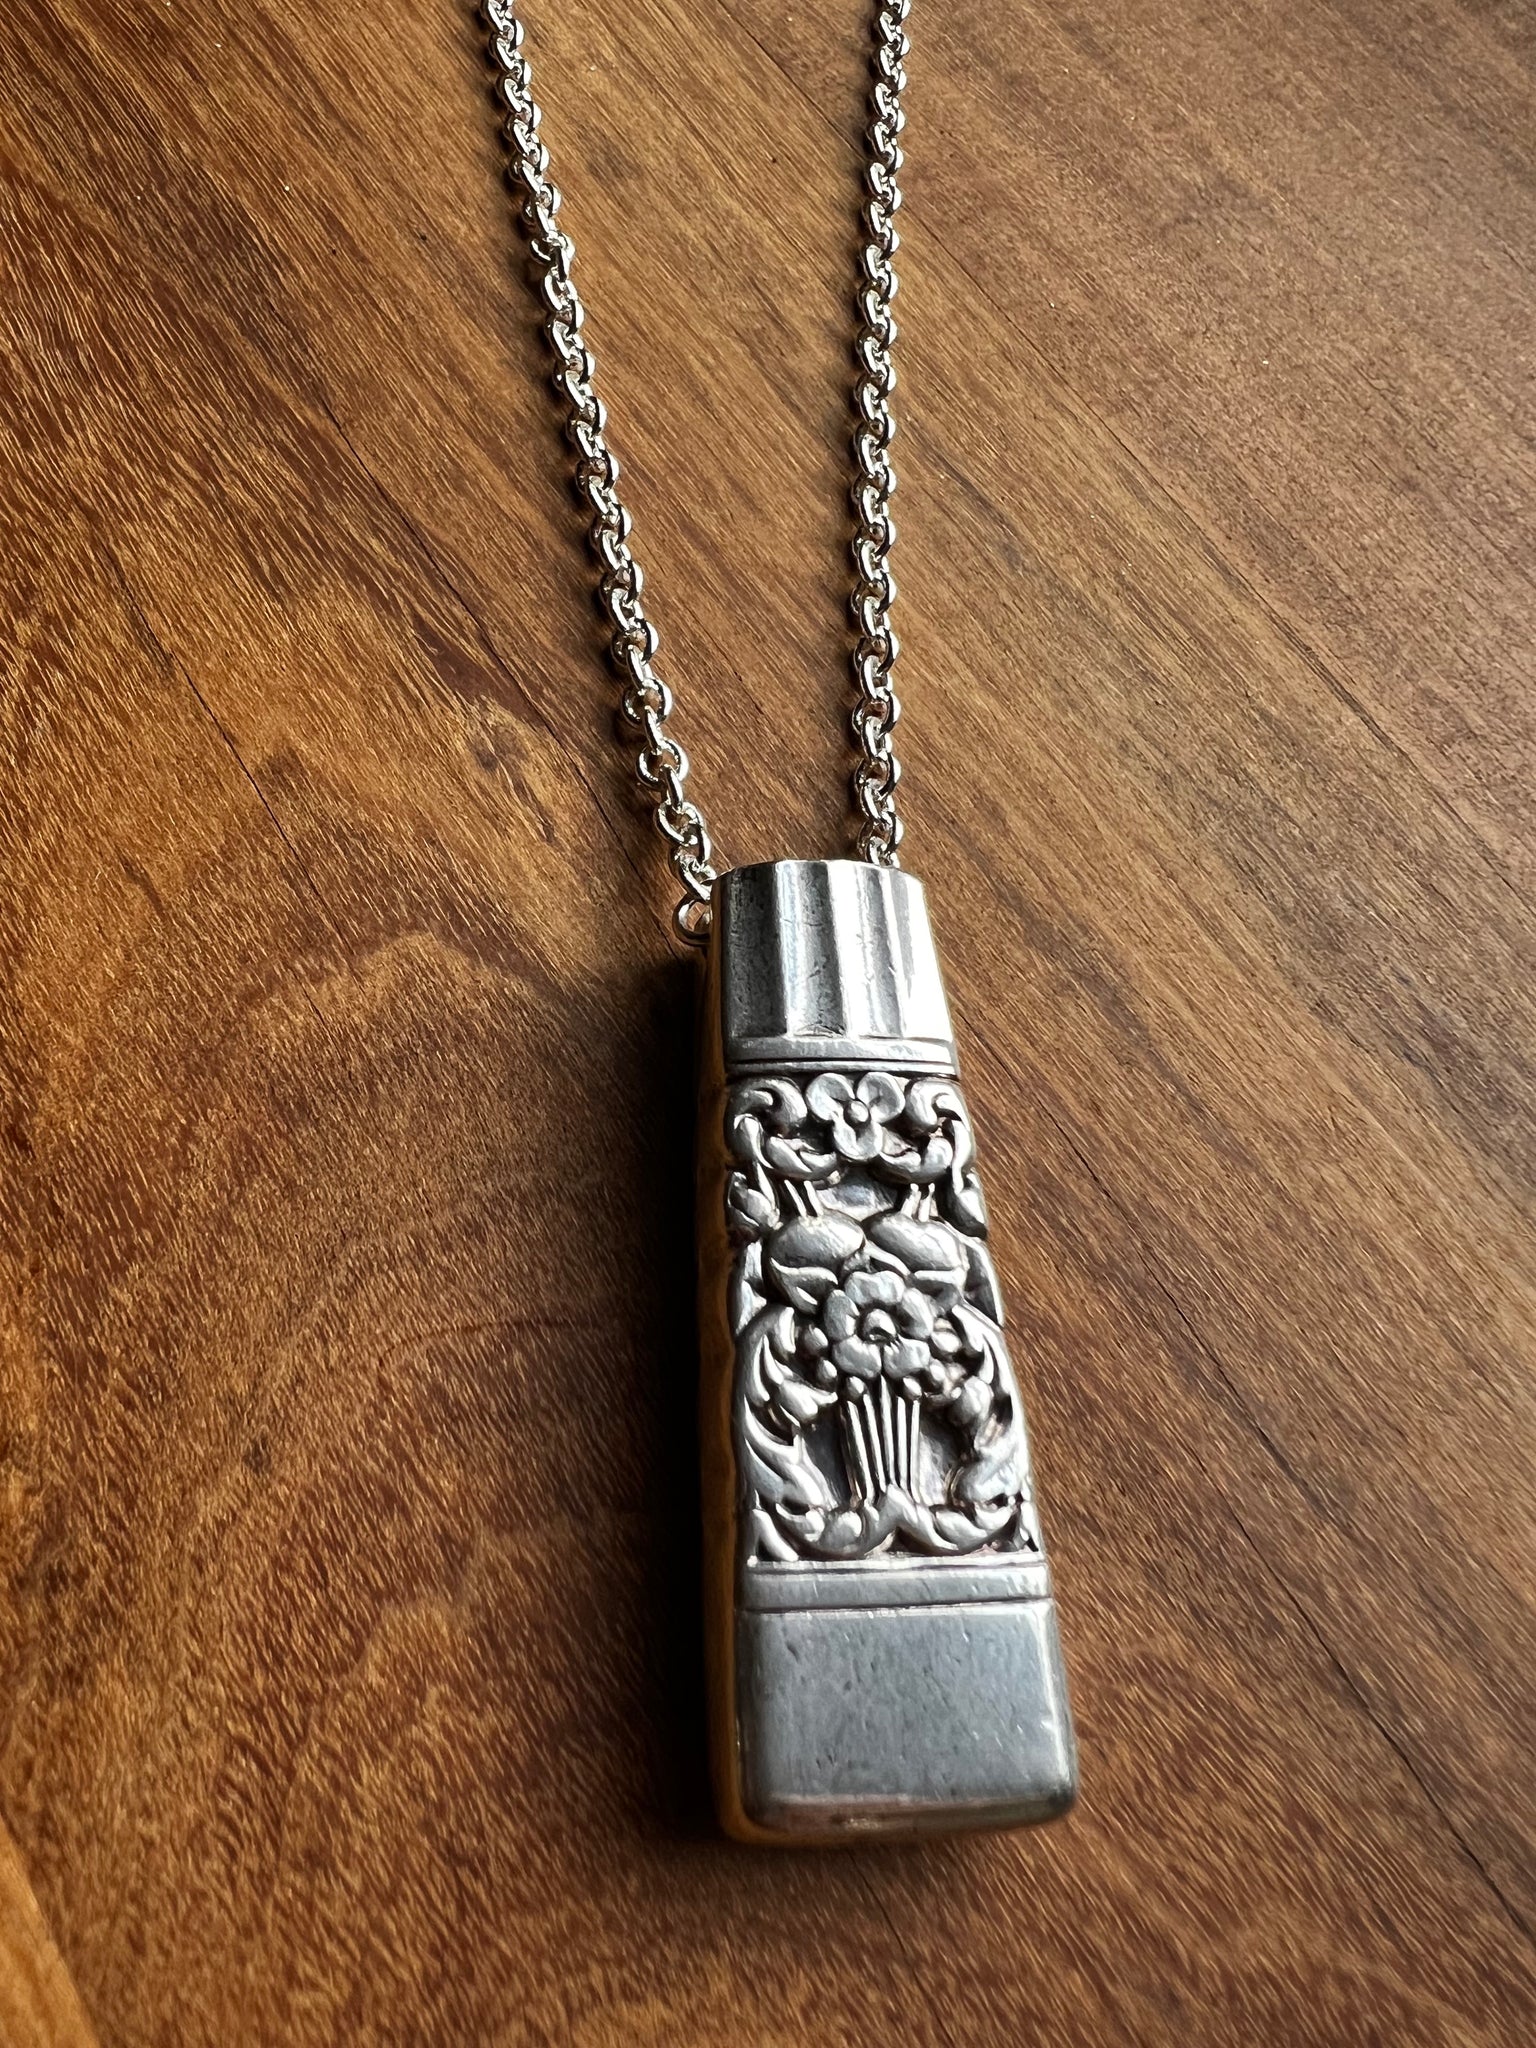 The Forager - a vessel pendant necklace crafted from an antique knife handle